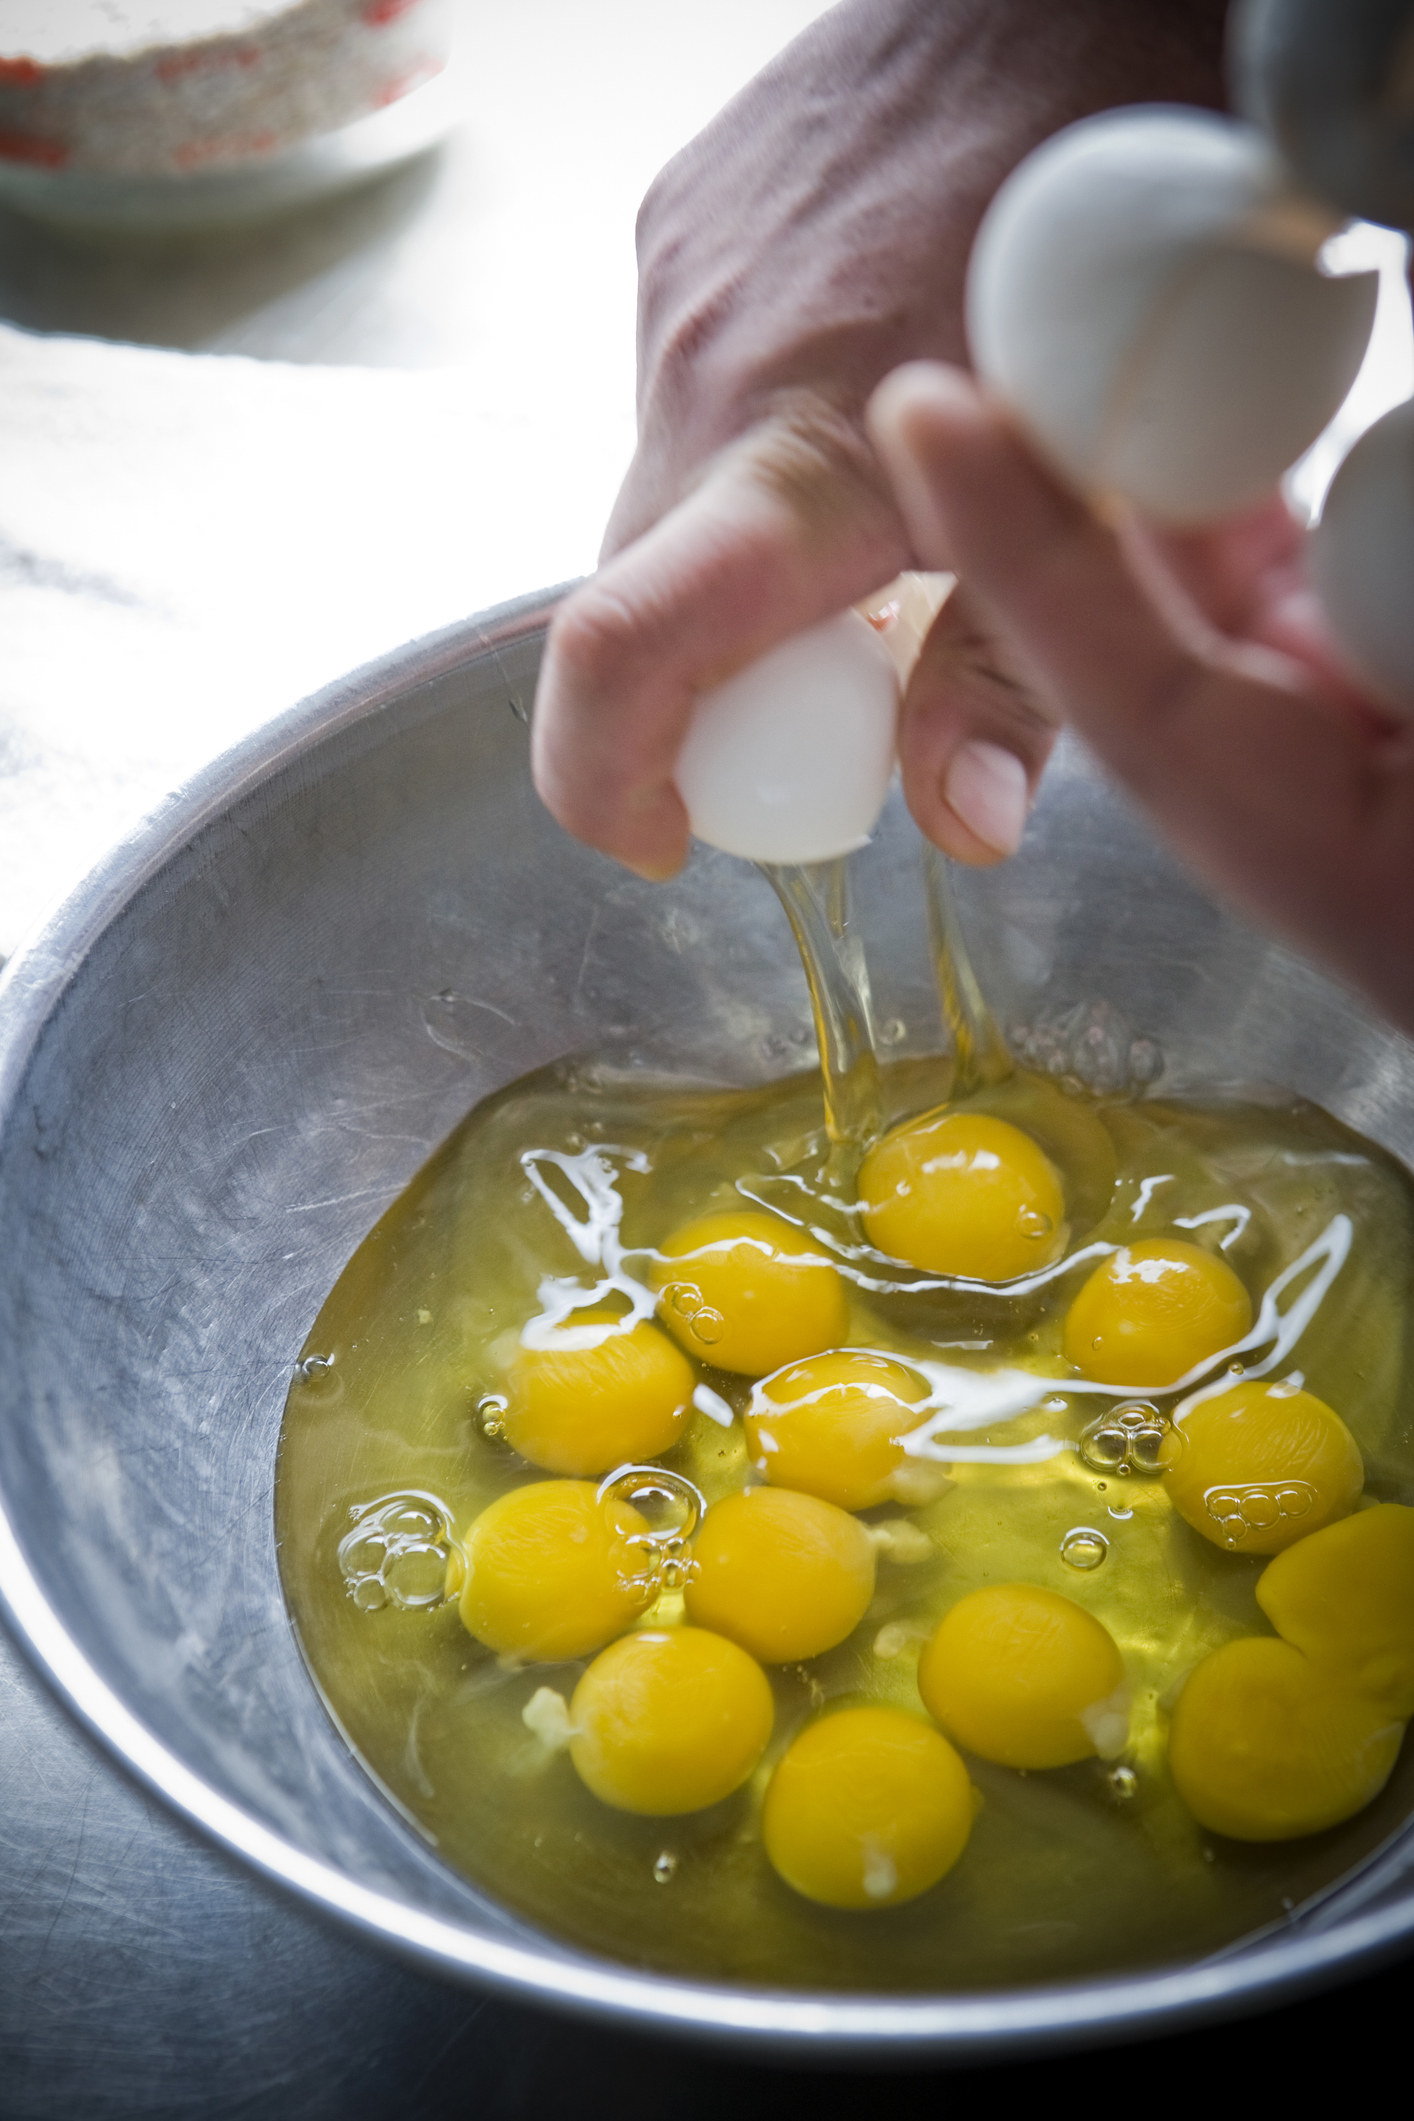 Hands cracking eggs into bowl.